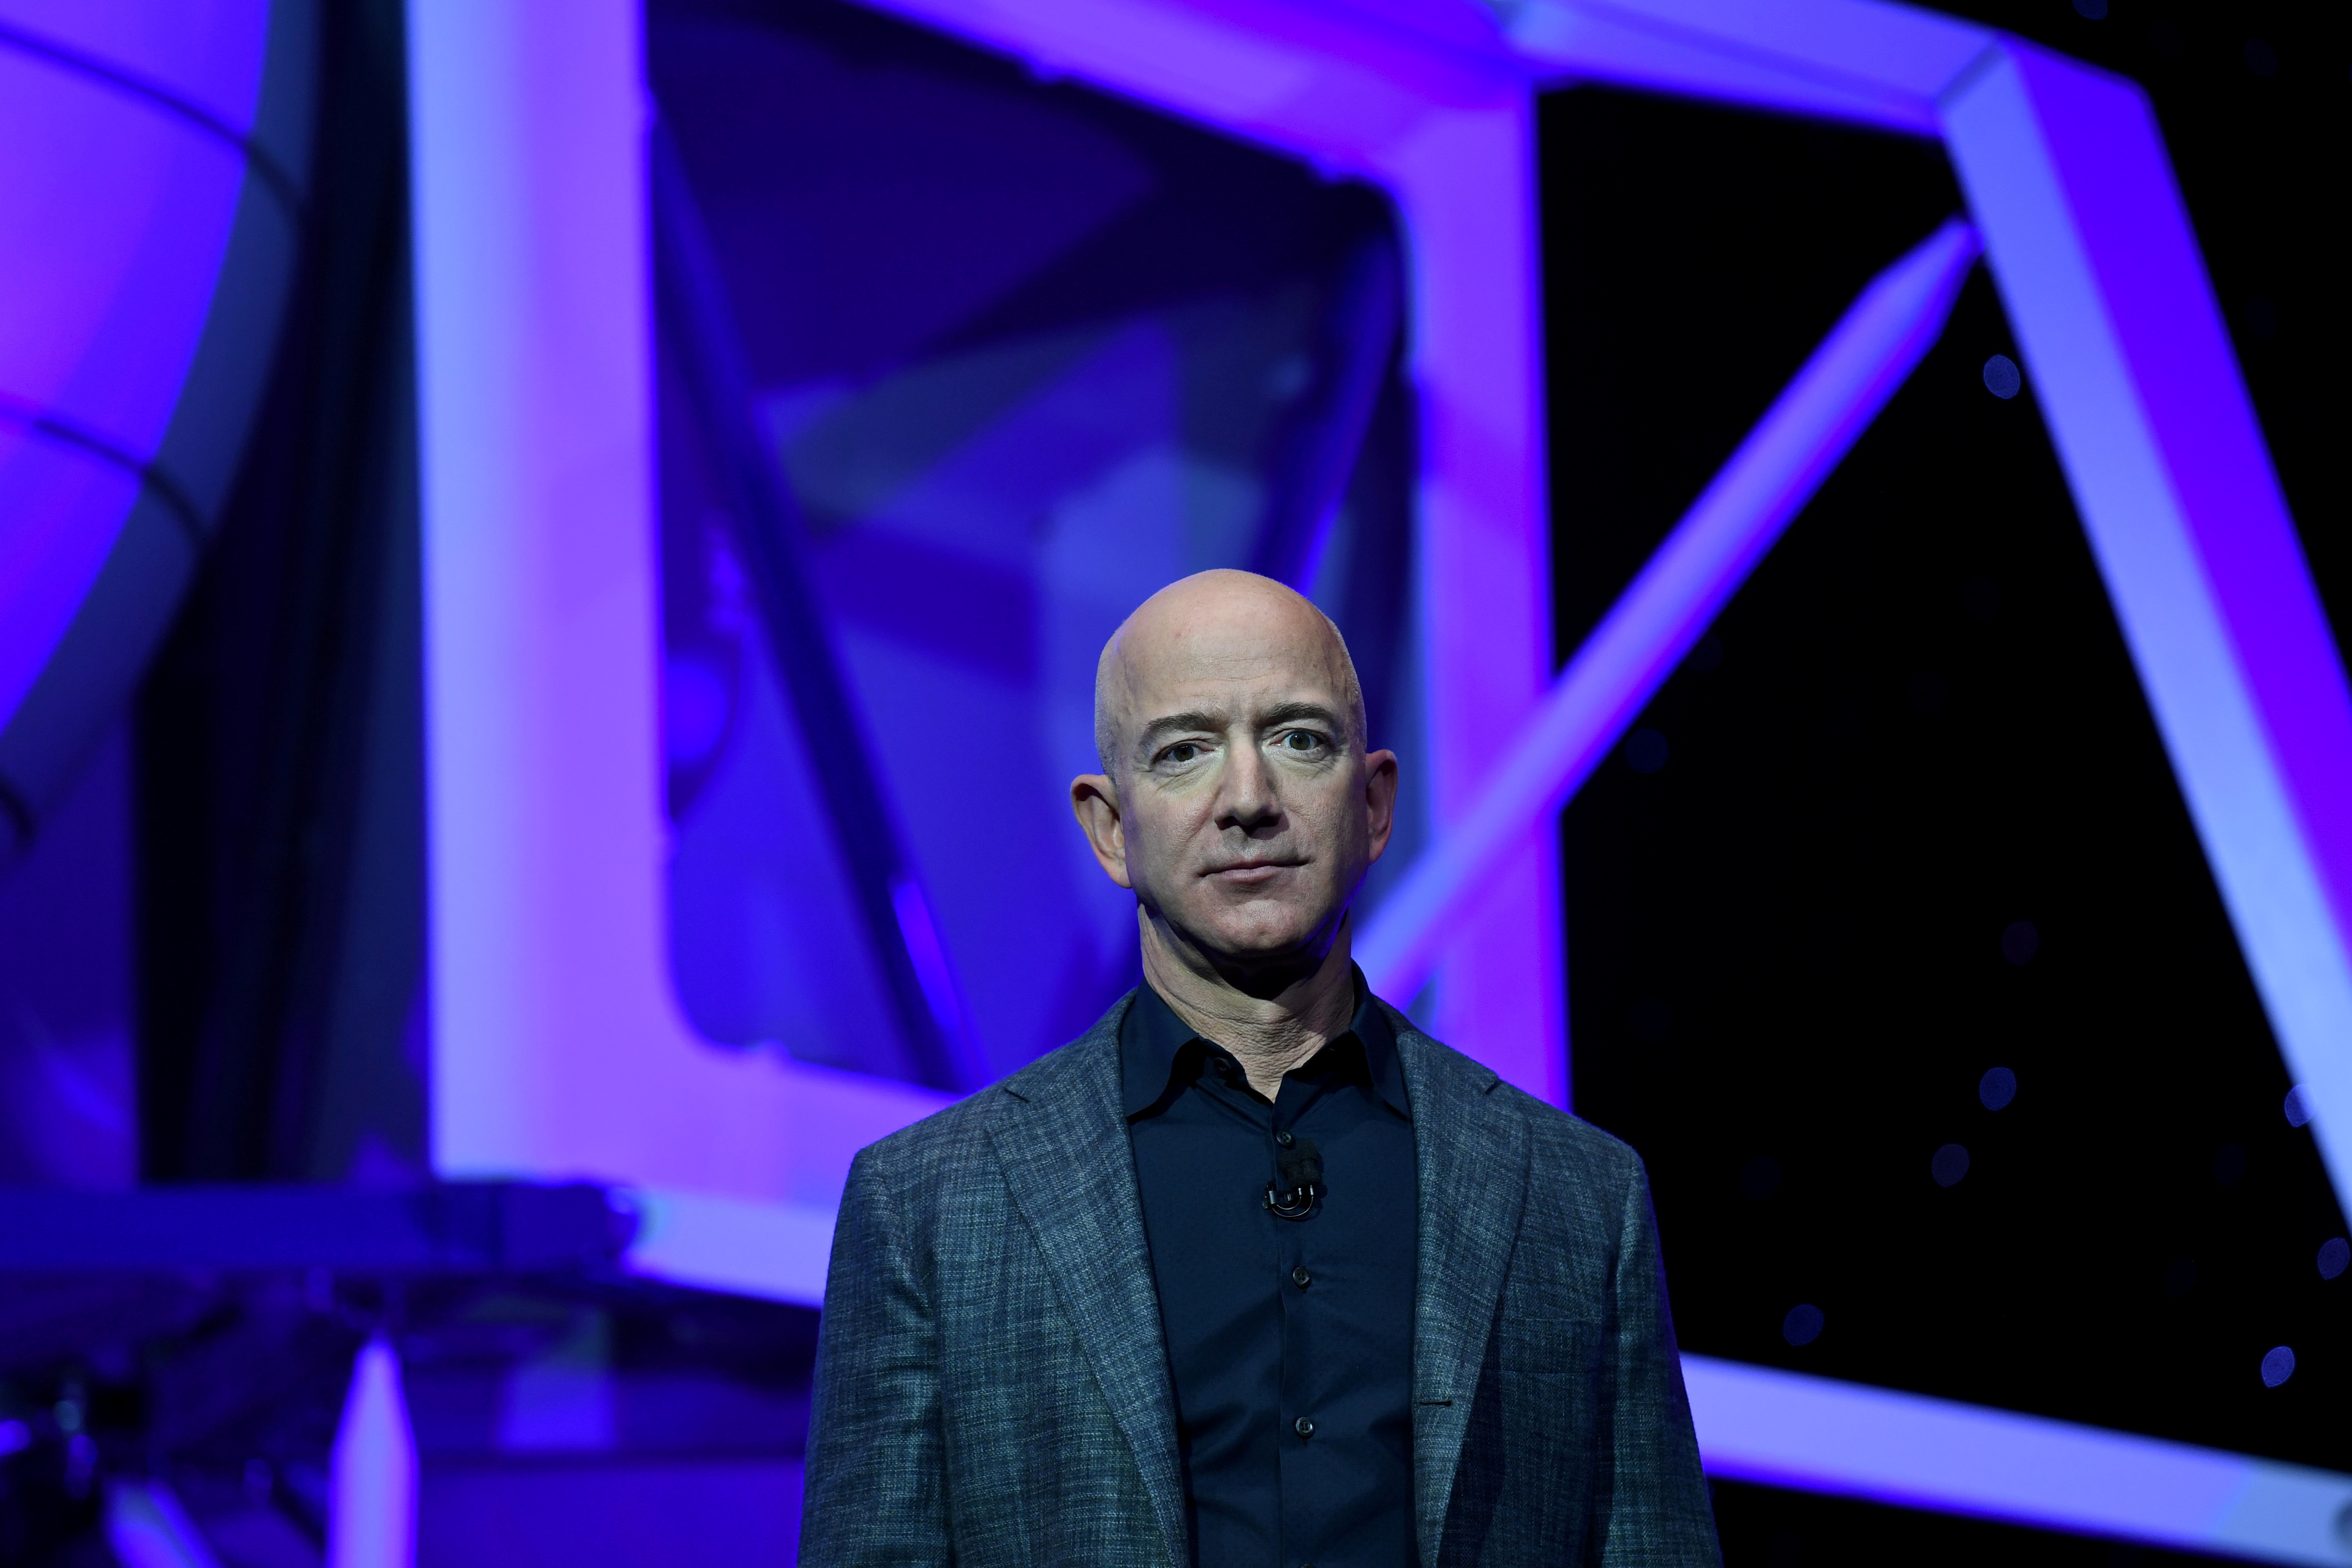 FILE PHOTO: Founder, Chairman, CEO and President of Amazon Jeff Bezos unveils his space company Blue Origin's space exploration lunar lander rocket called Blue Moon during an unveiling event in Washington